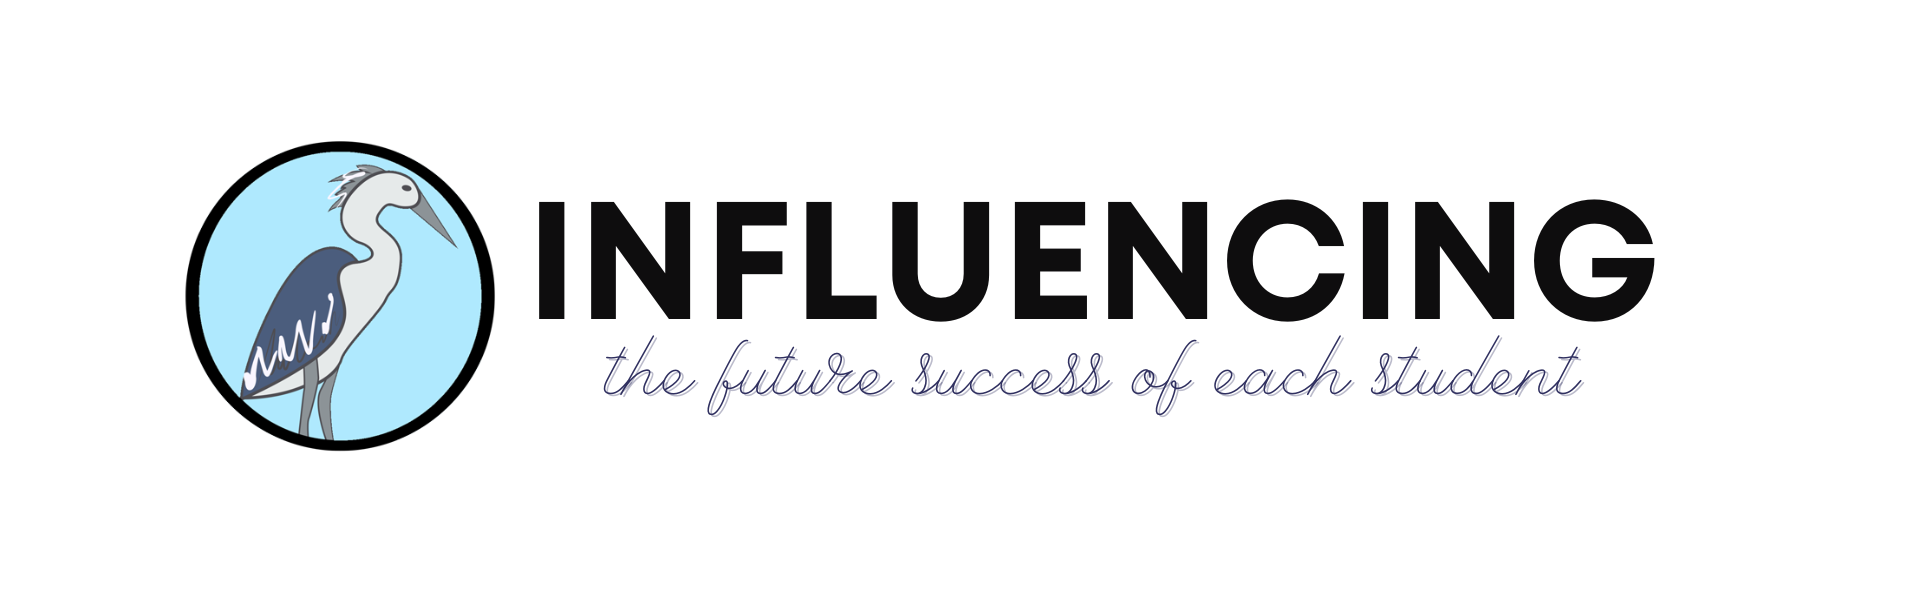 influencing the future success of each student